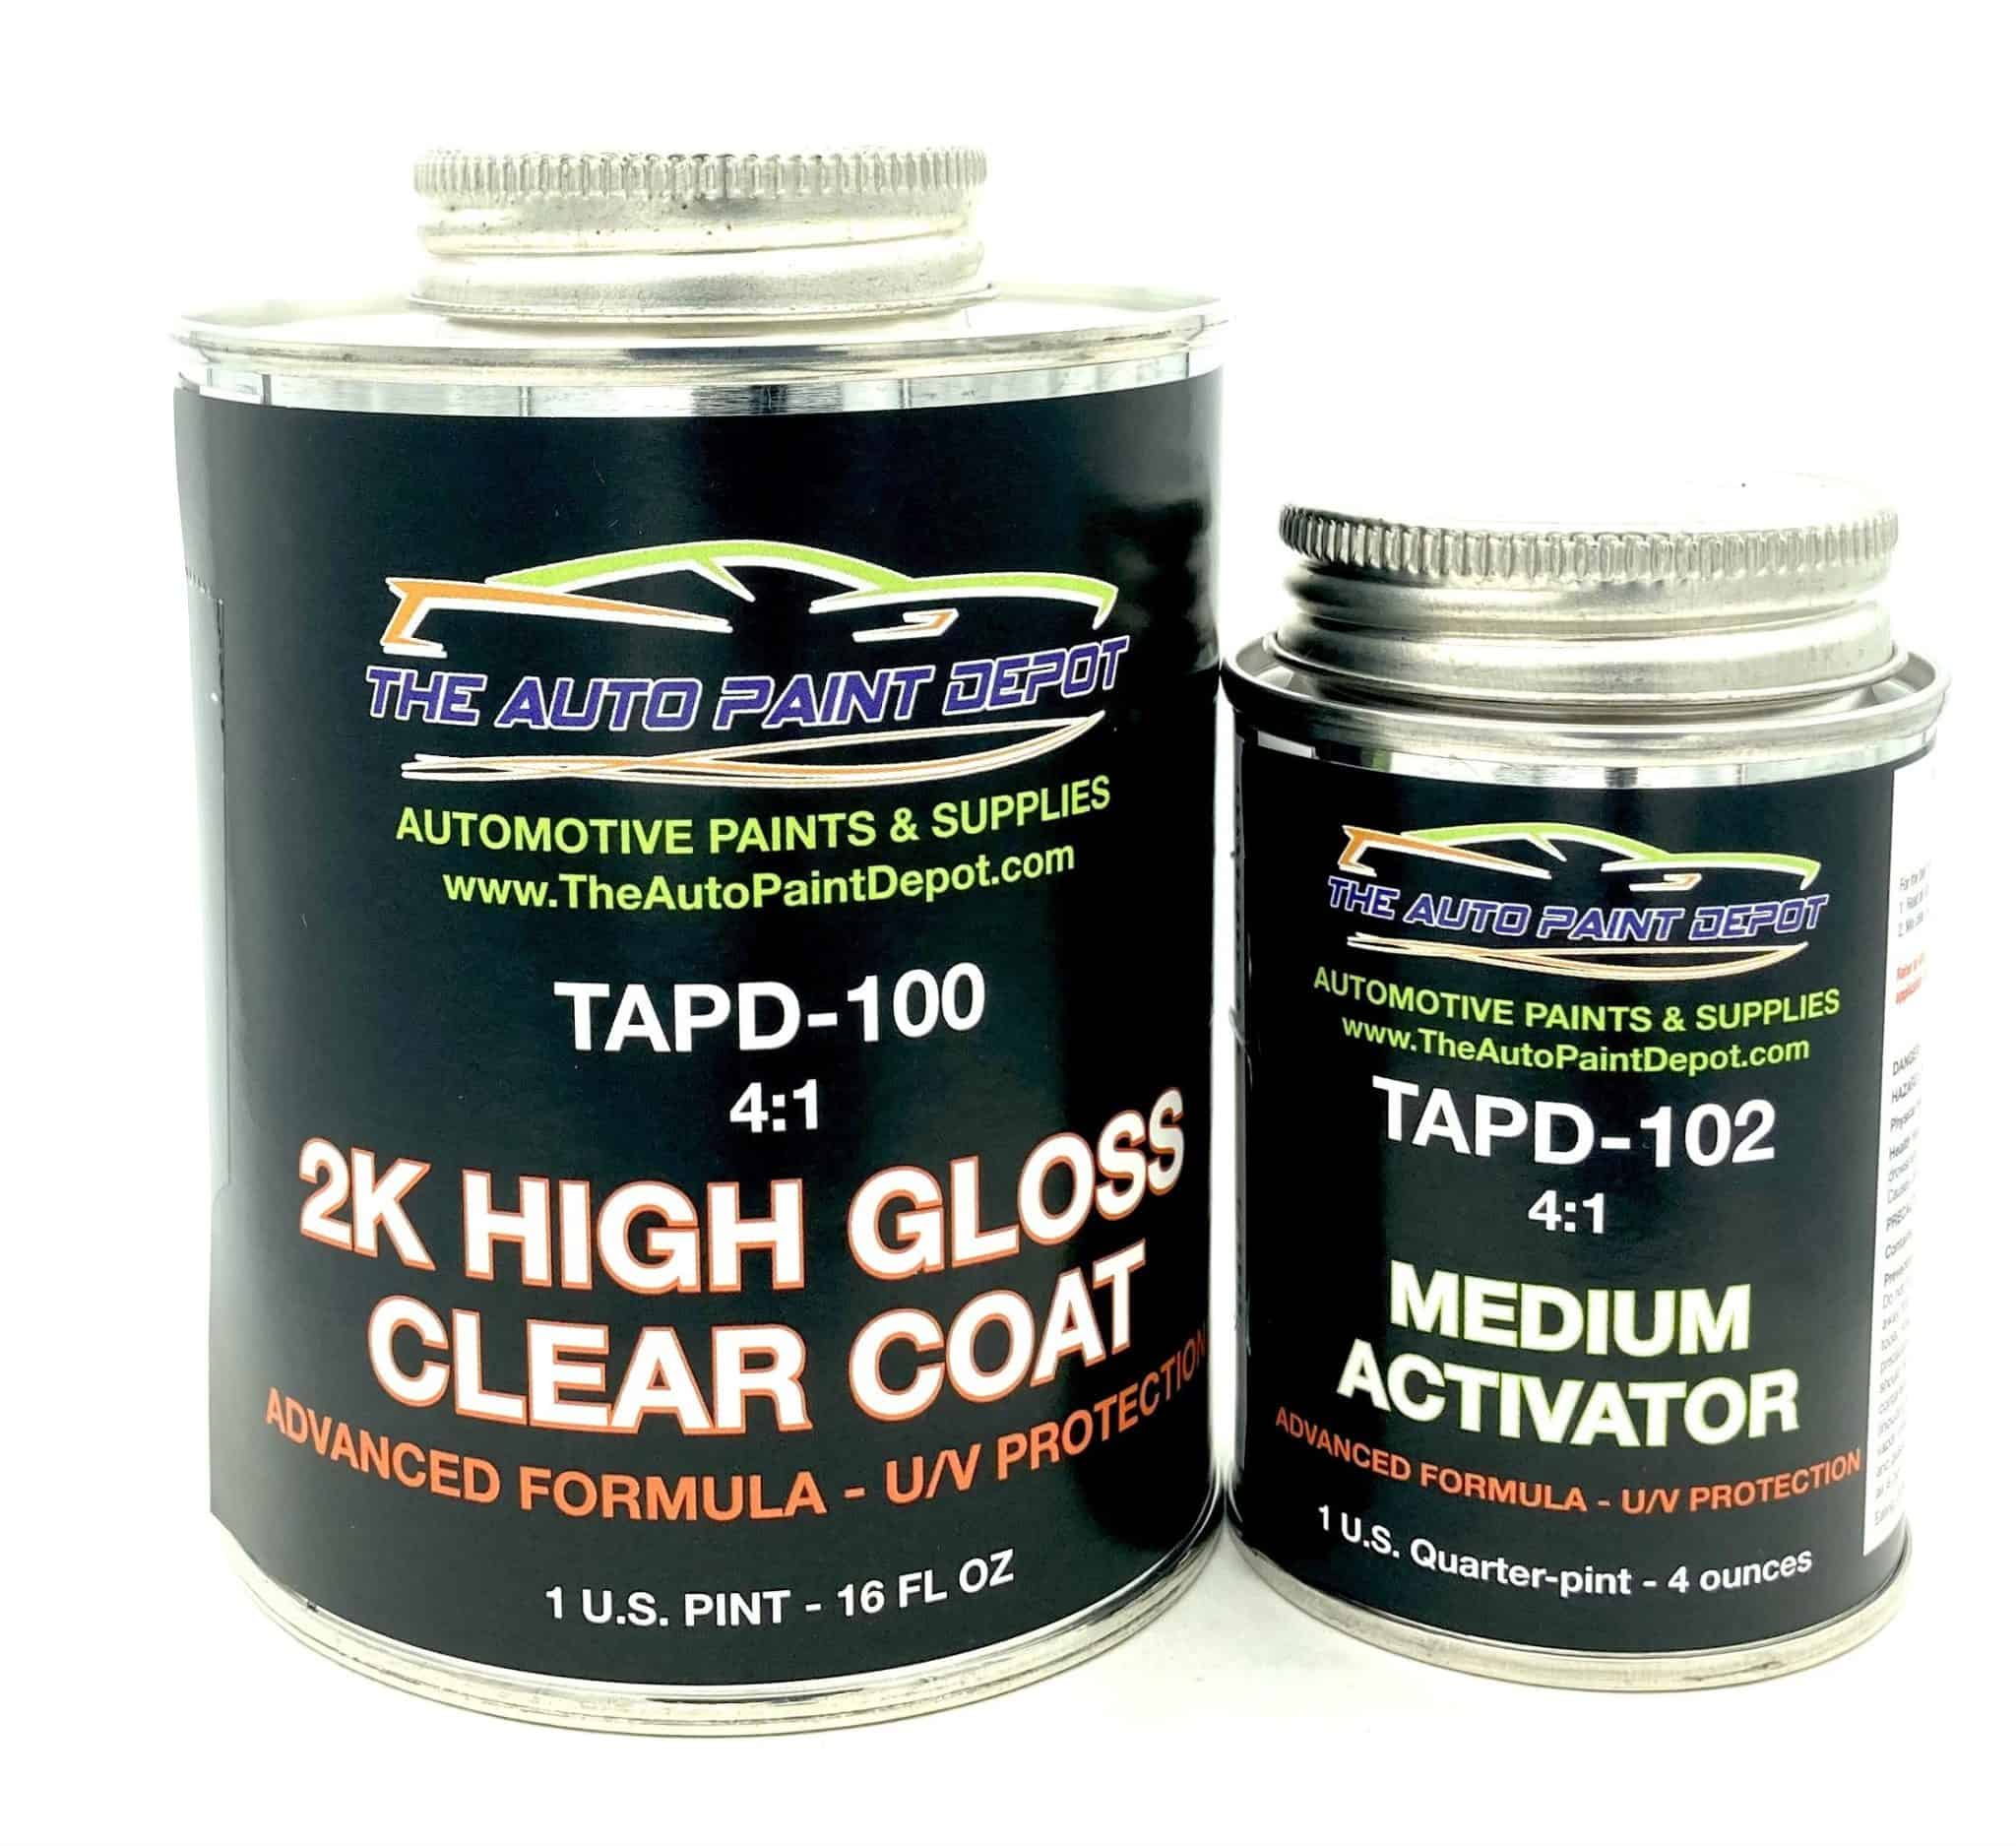 TAPD 2K HIGH GLOSS Professional Clear Coat Pint Kit w/Medium Activator (4:1) 2